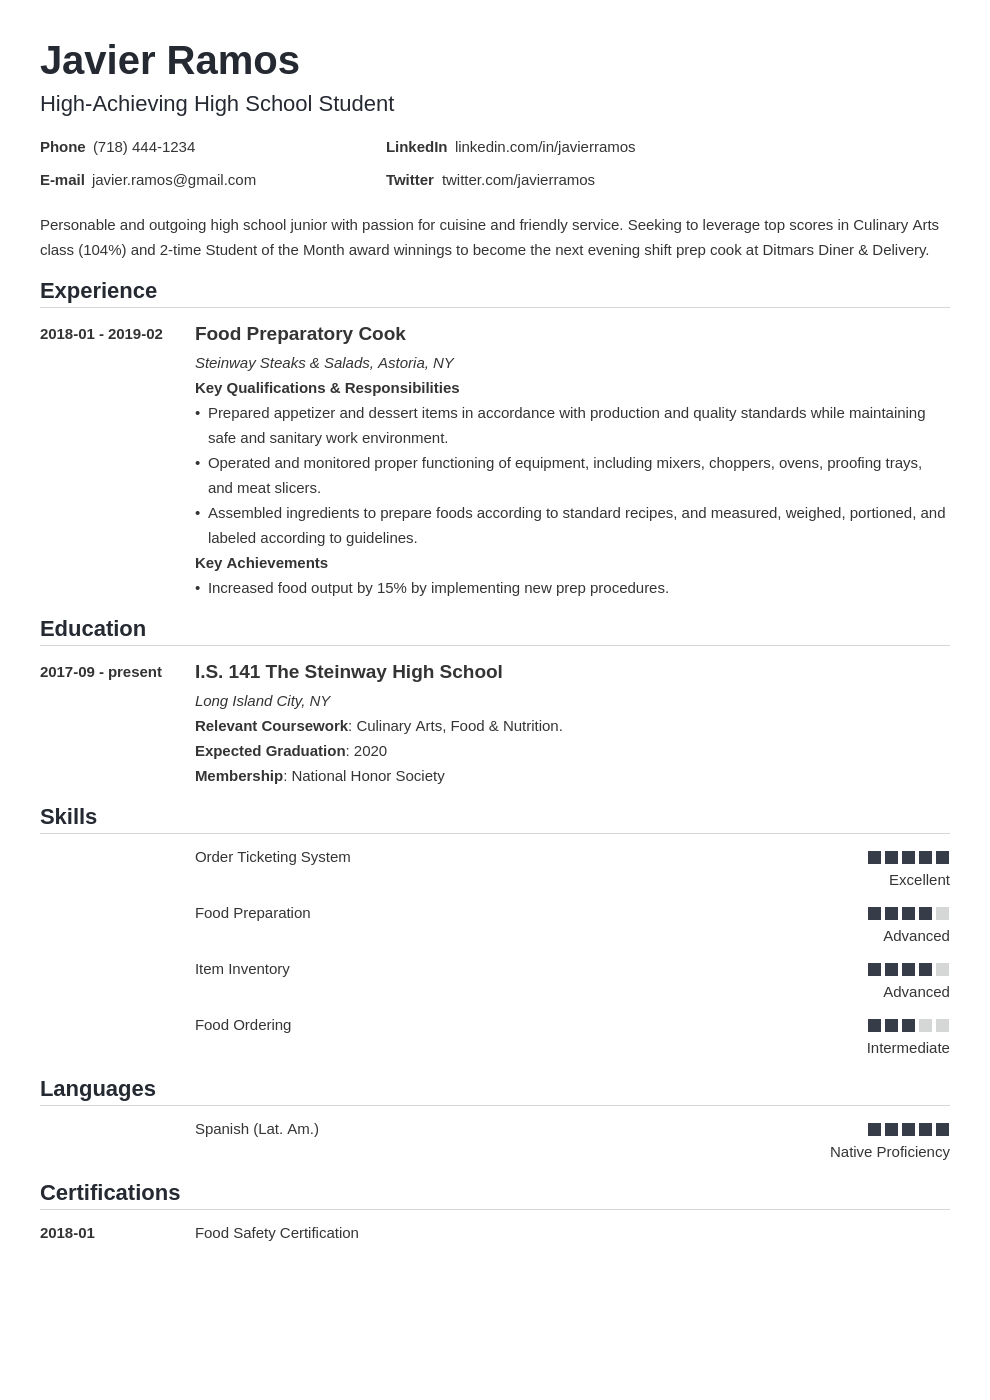 How to write a high school resume for college application